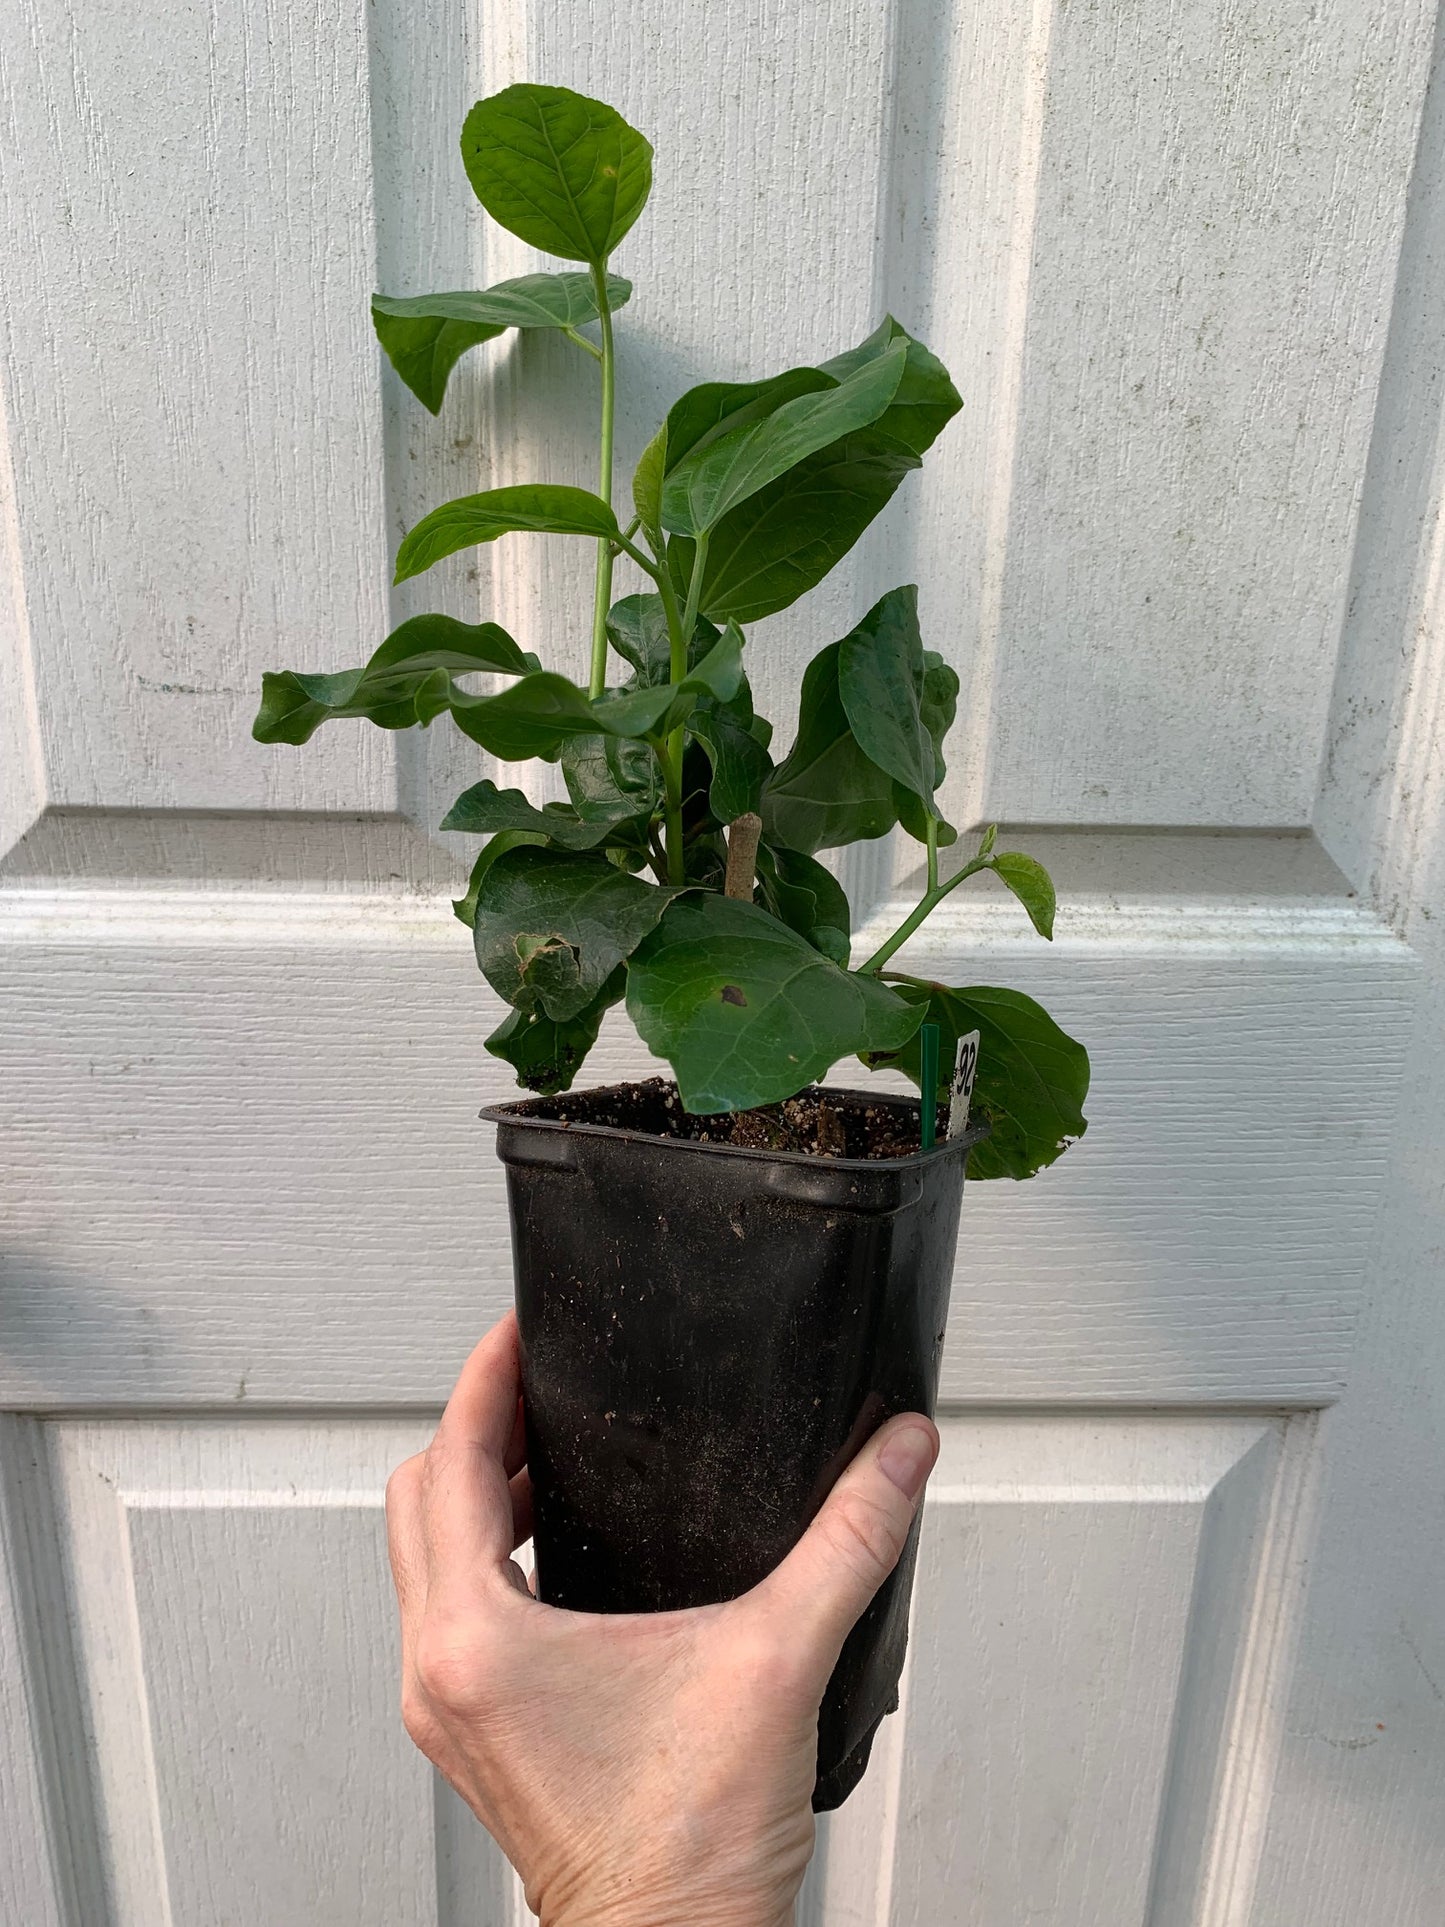 Tropical Hibiscus 'Blue Jean Baby' - 5" pot